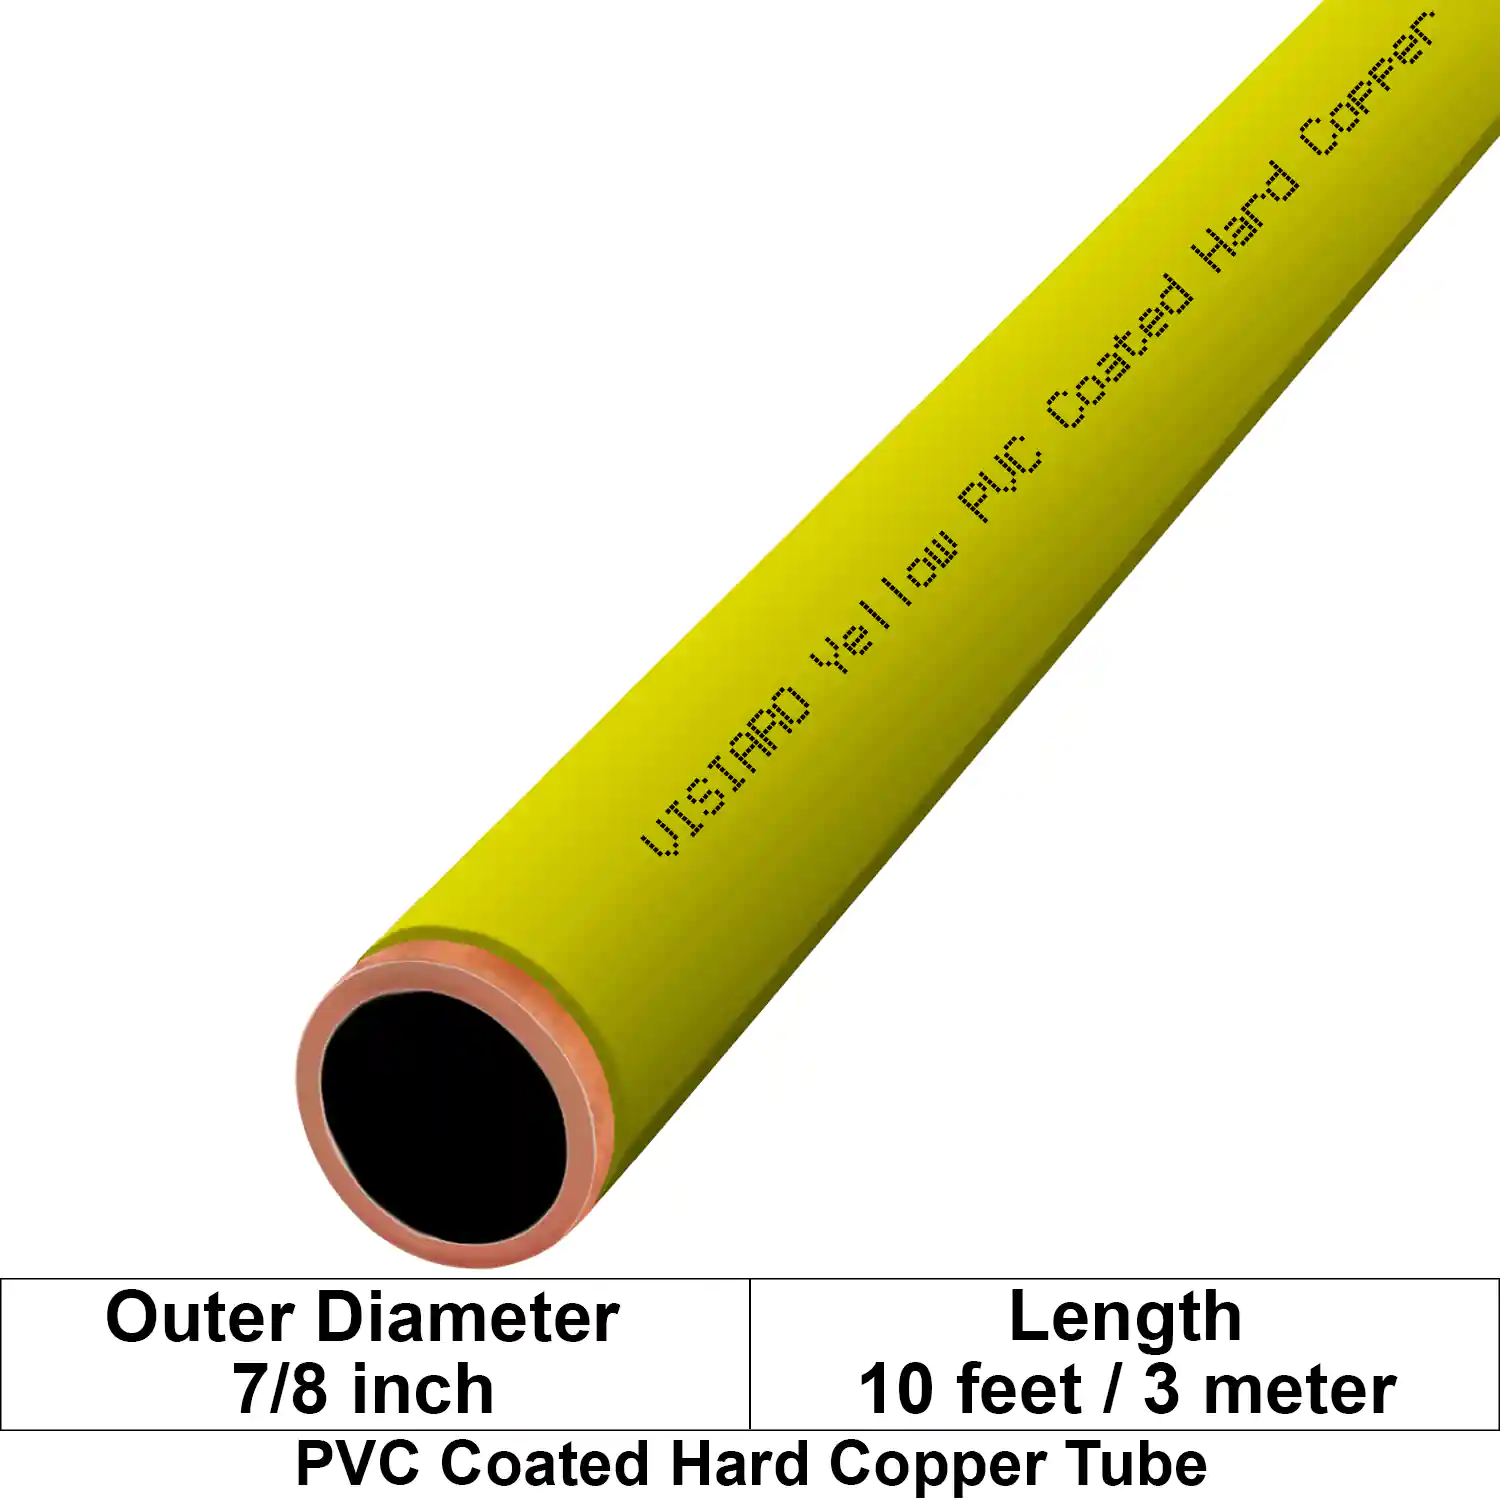 Visiaro Yellow PVC Coated Hard Copper Tube 10ft long Outer Diameter - 7/8 inch